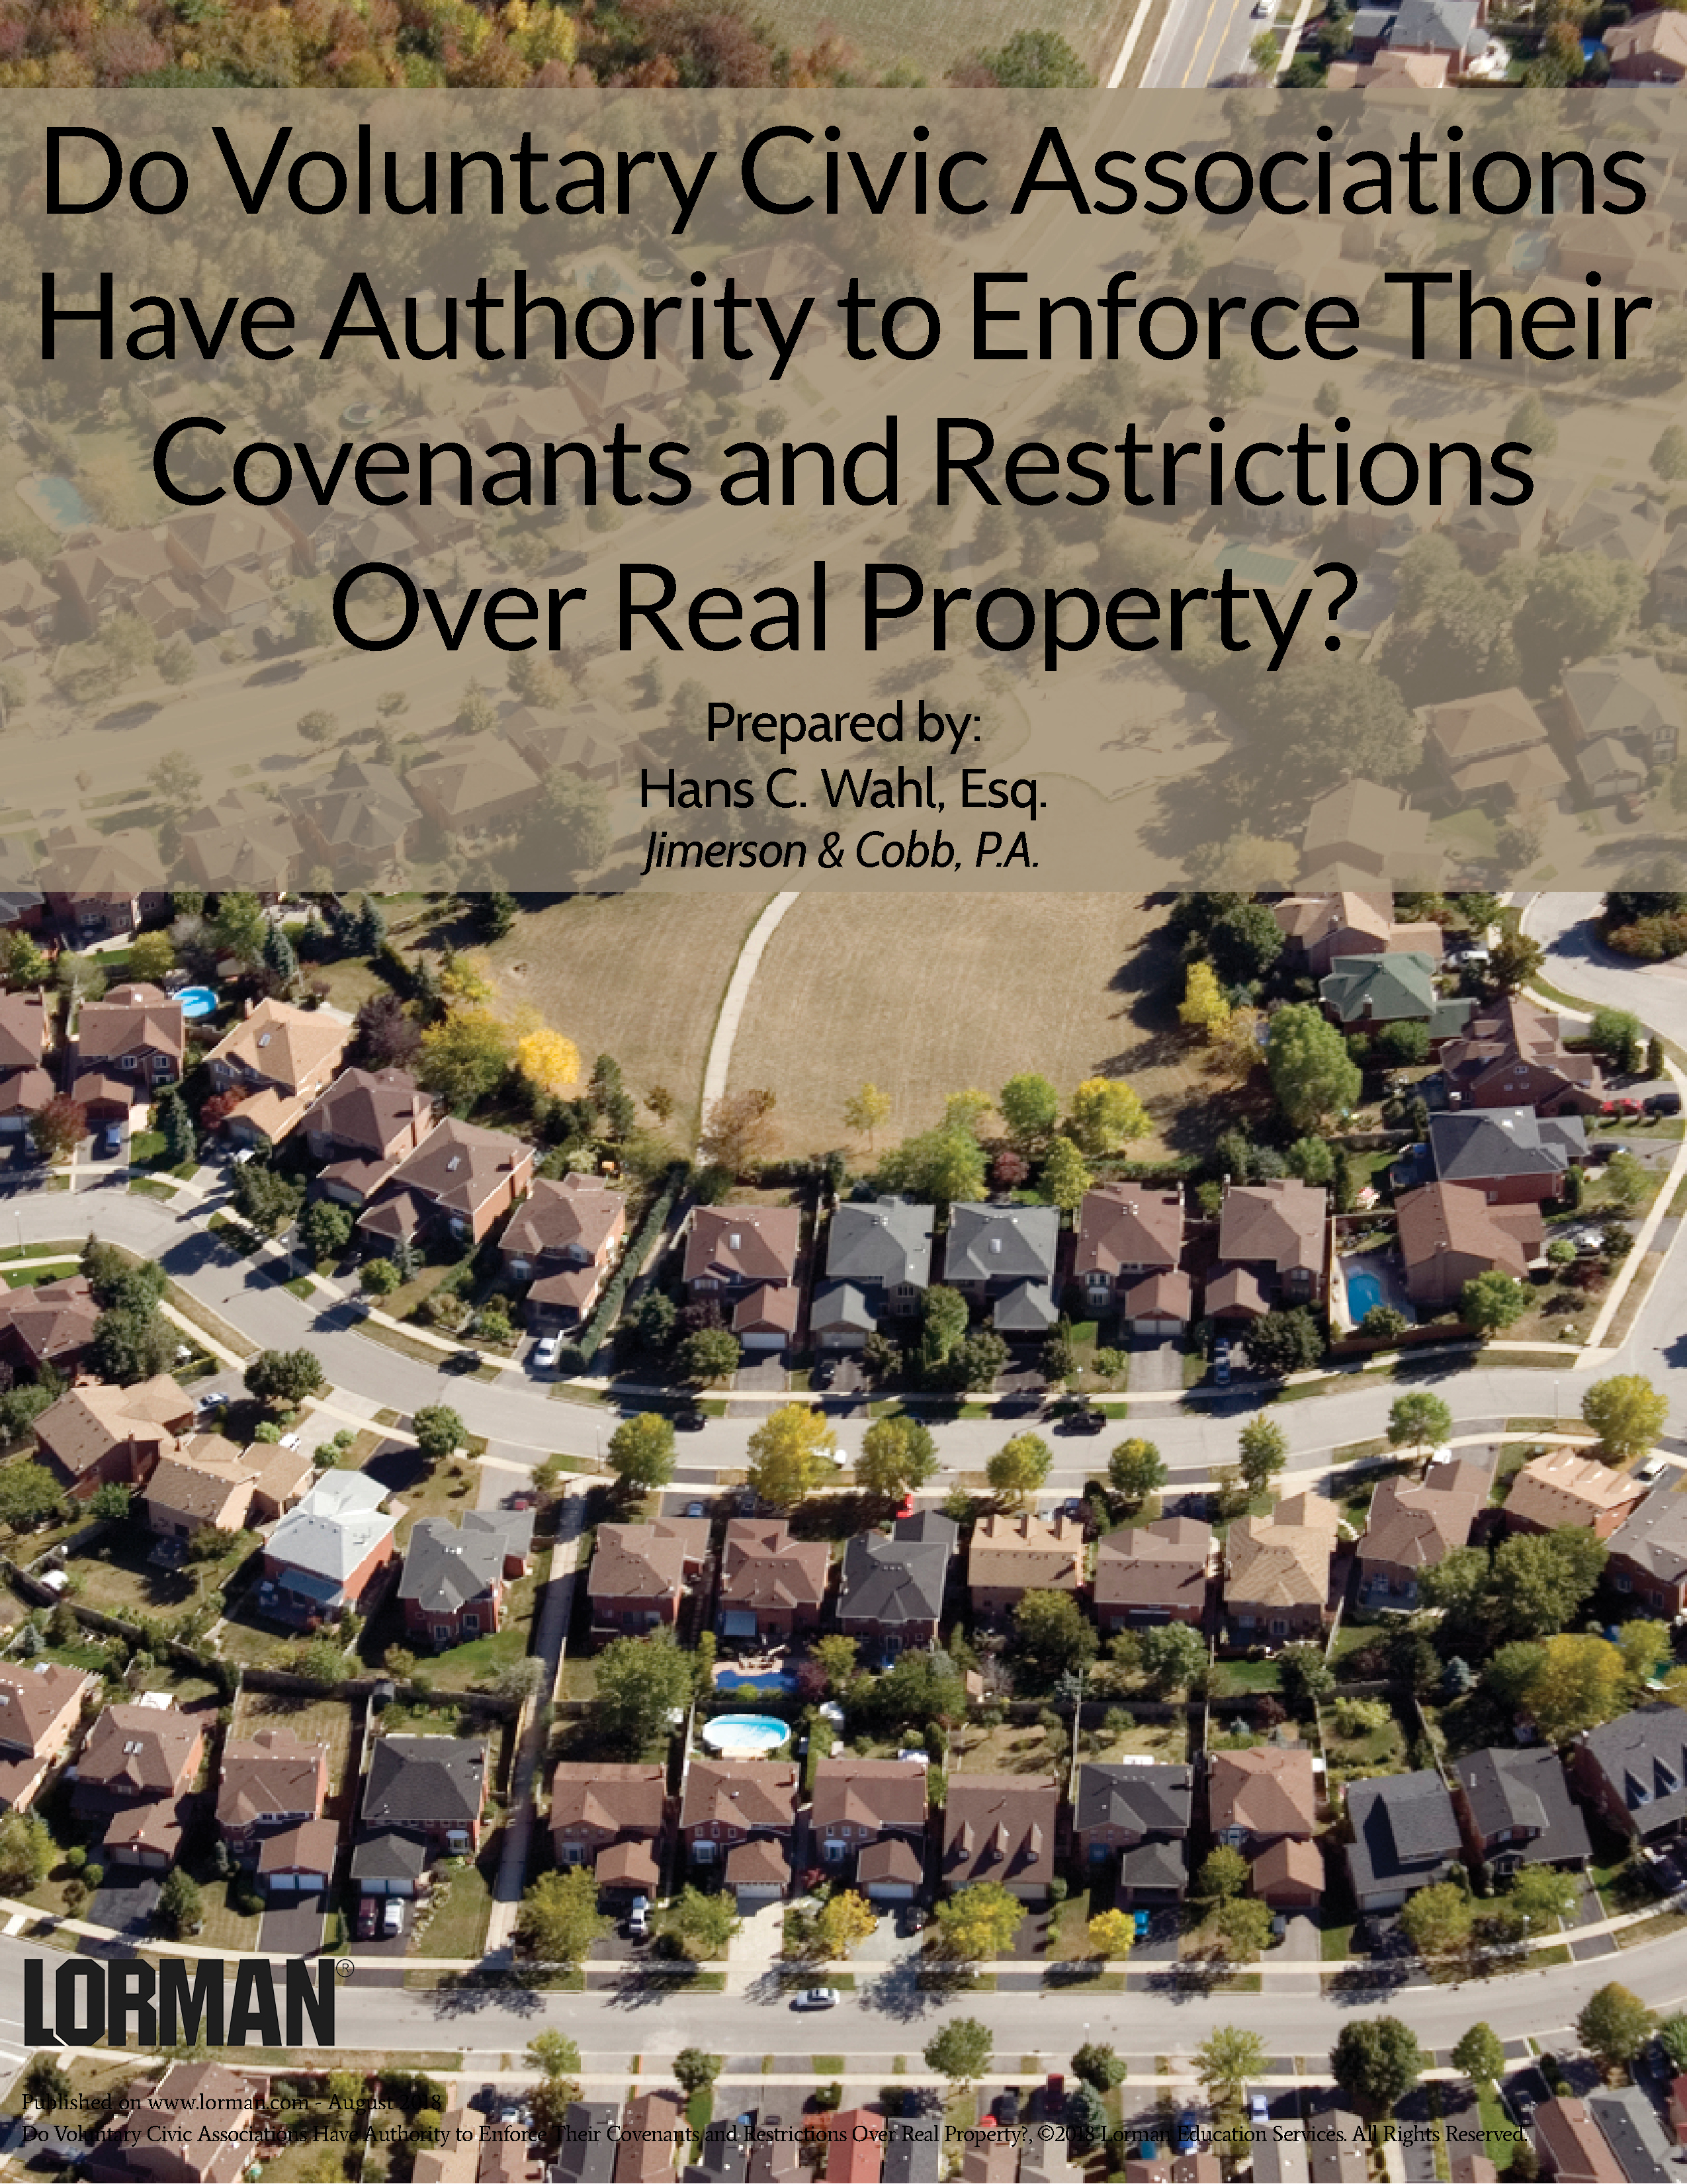 Do Voluntary Civic Associations Have Authority to Enforce Real Property Covenants and Restrictions?